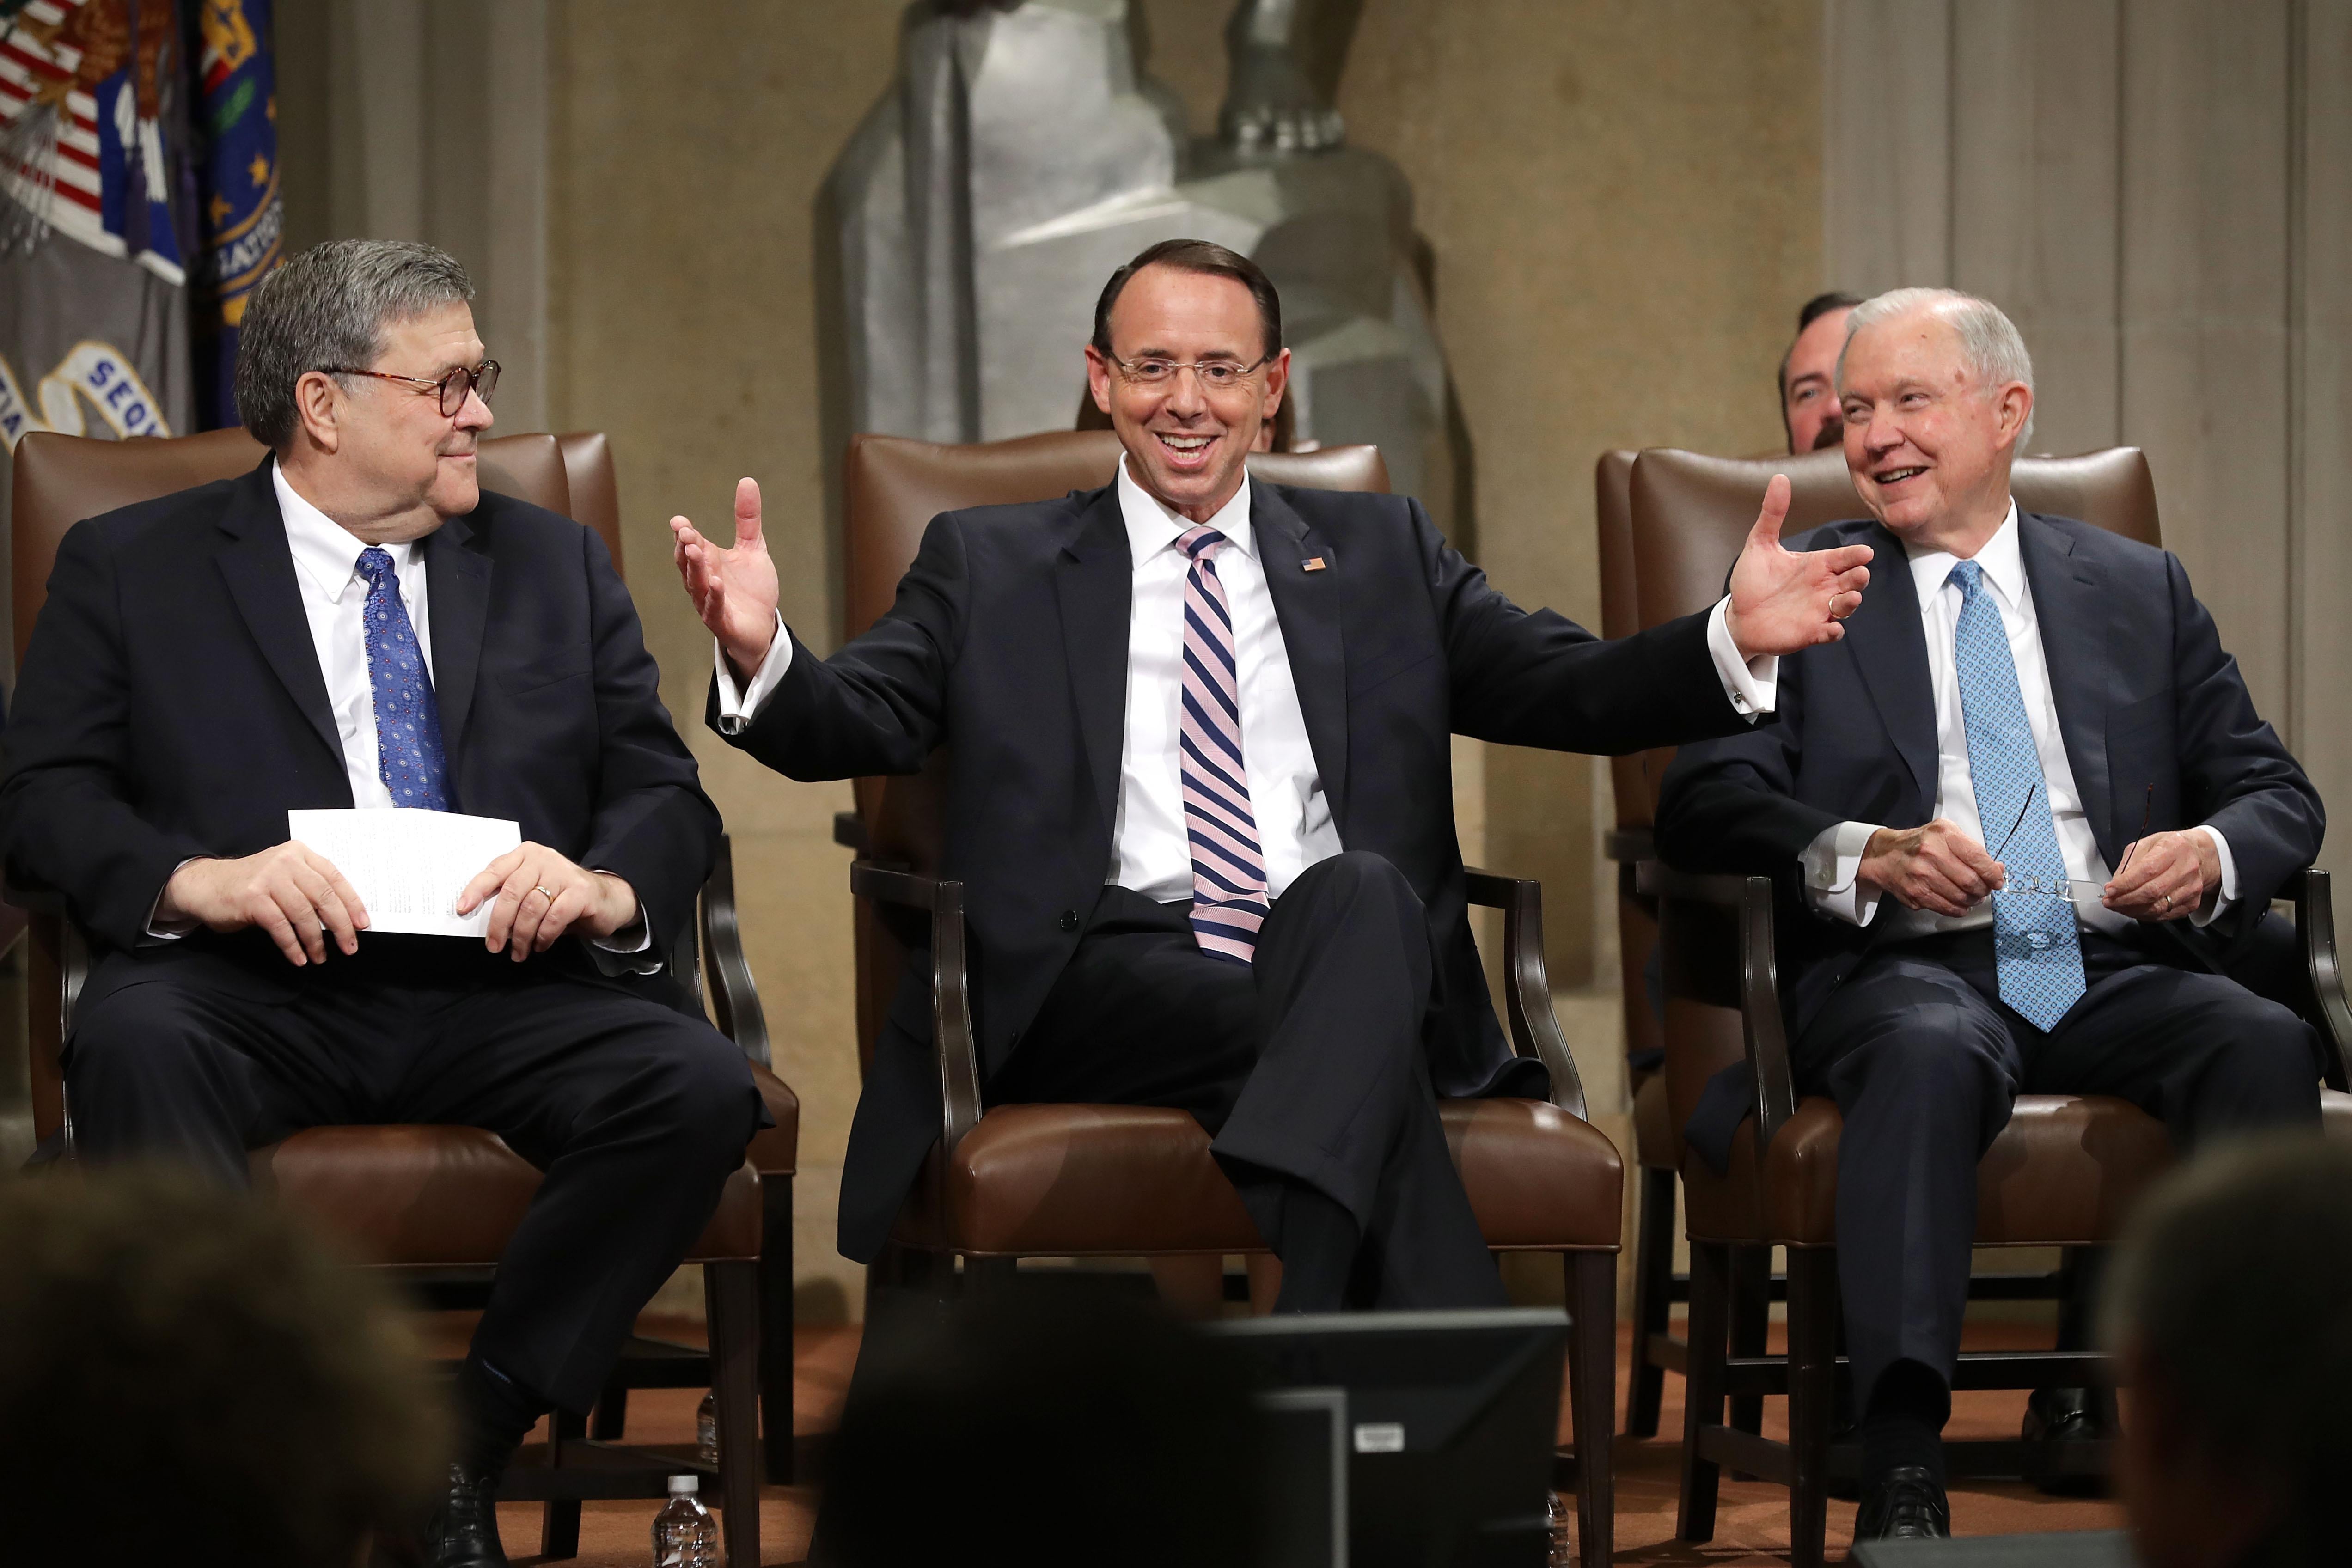 Rod Rosenstein smiles and raises his arms to a crowd as he sits onstage between Bill Barr and Jeff Sessions, both also smiling.